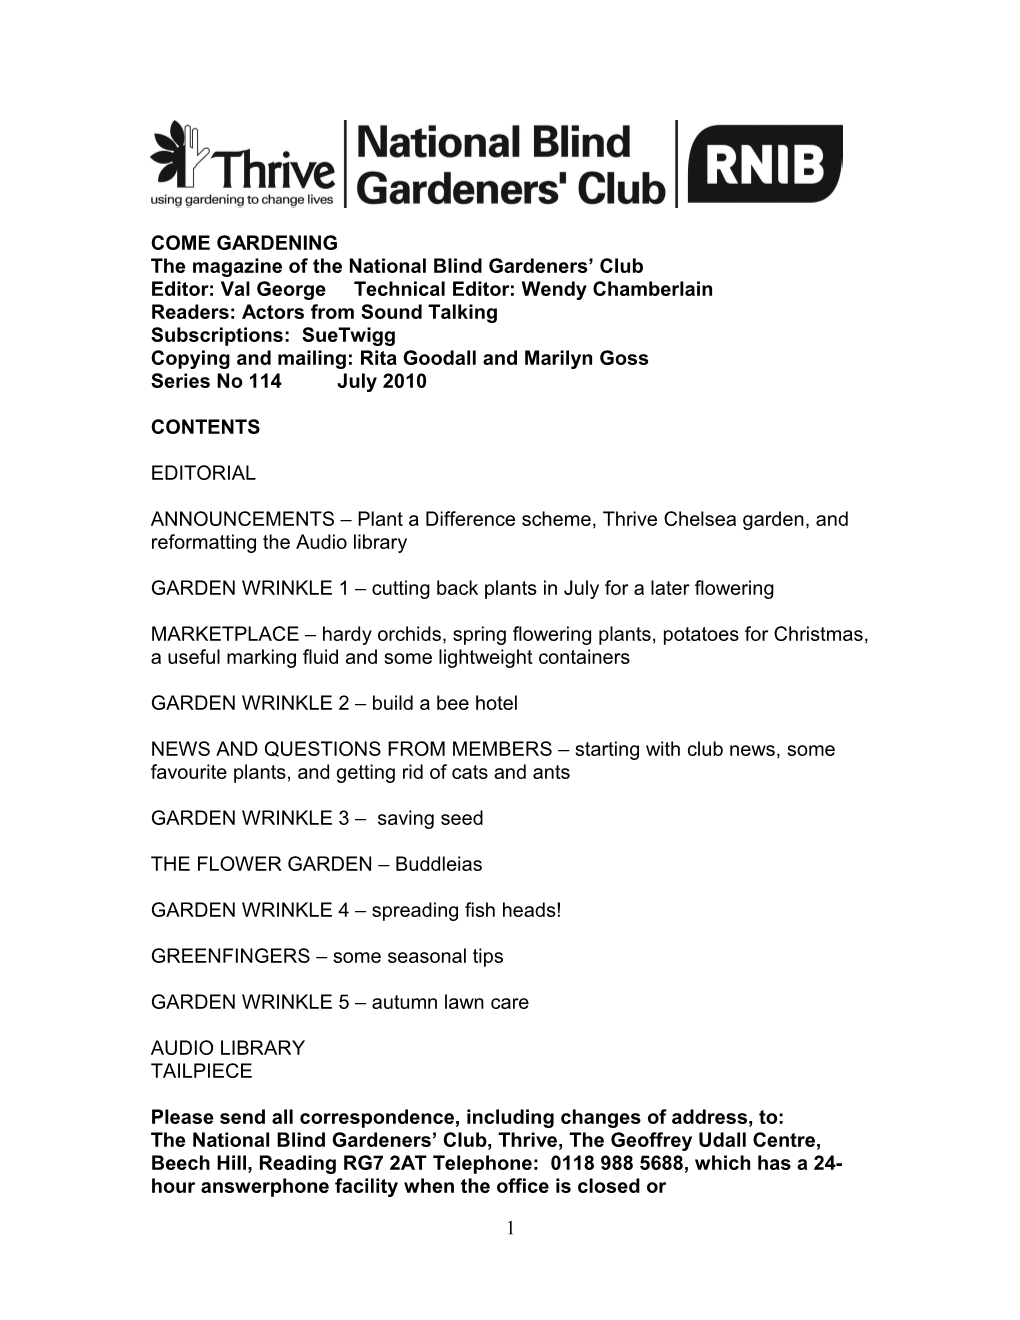 The Magazine of the National Blind Gardeners Club